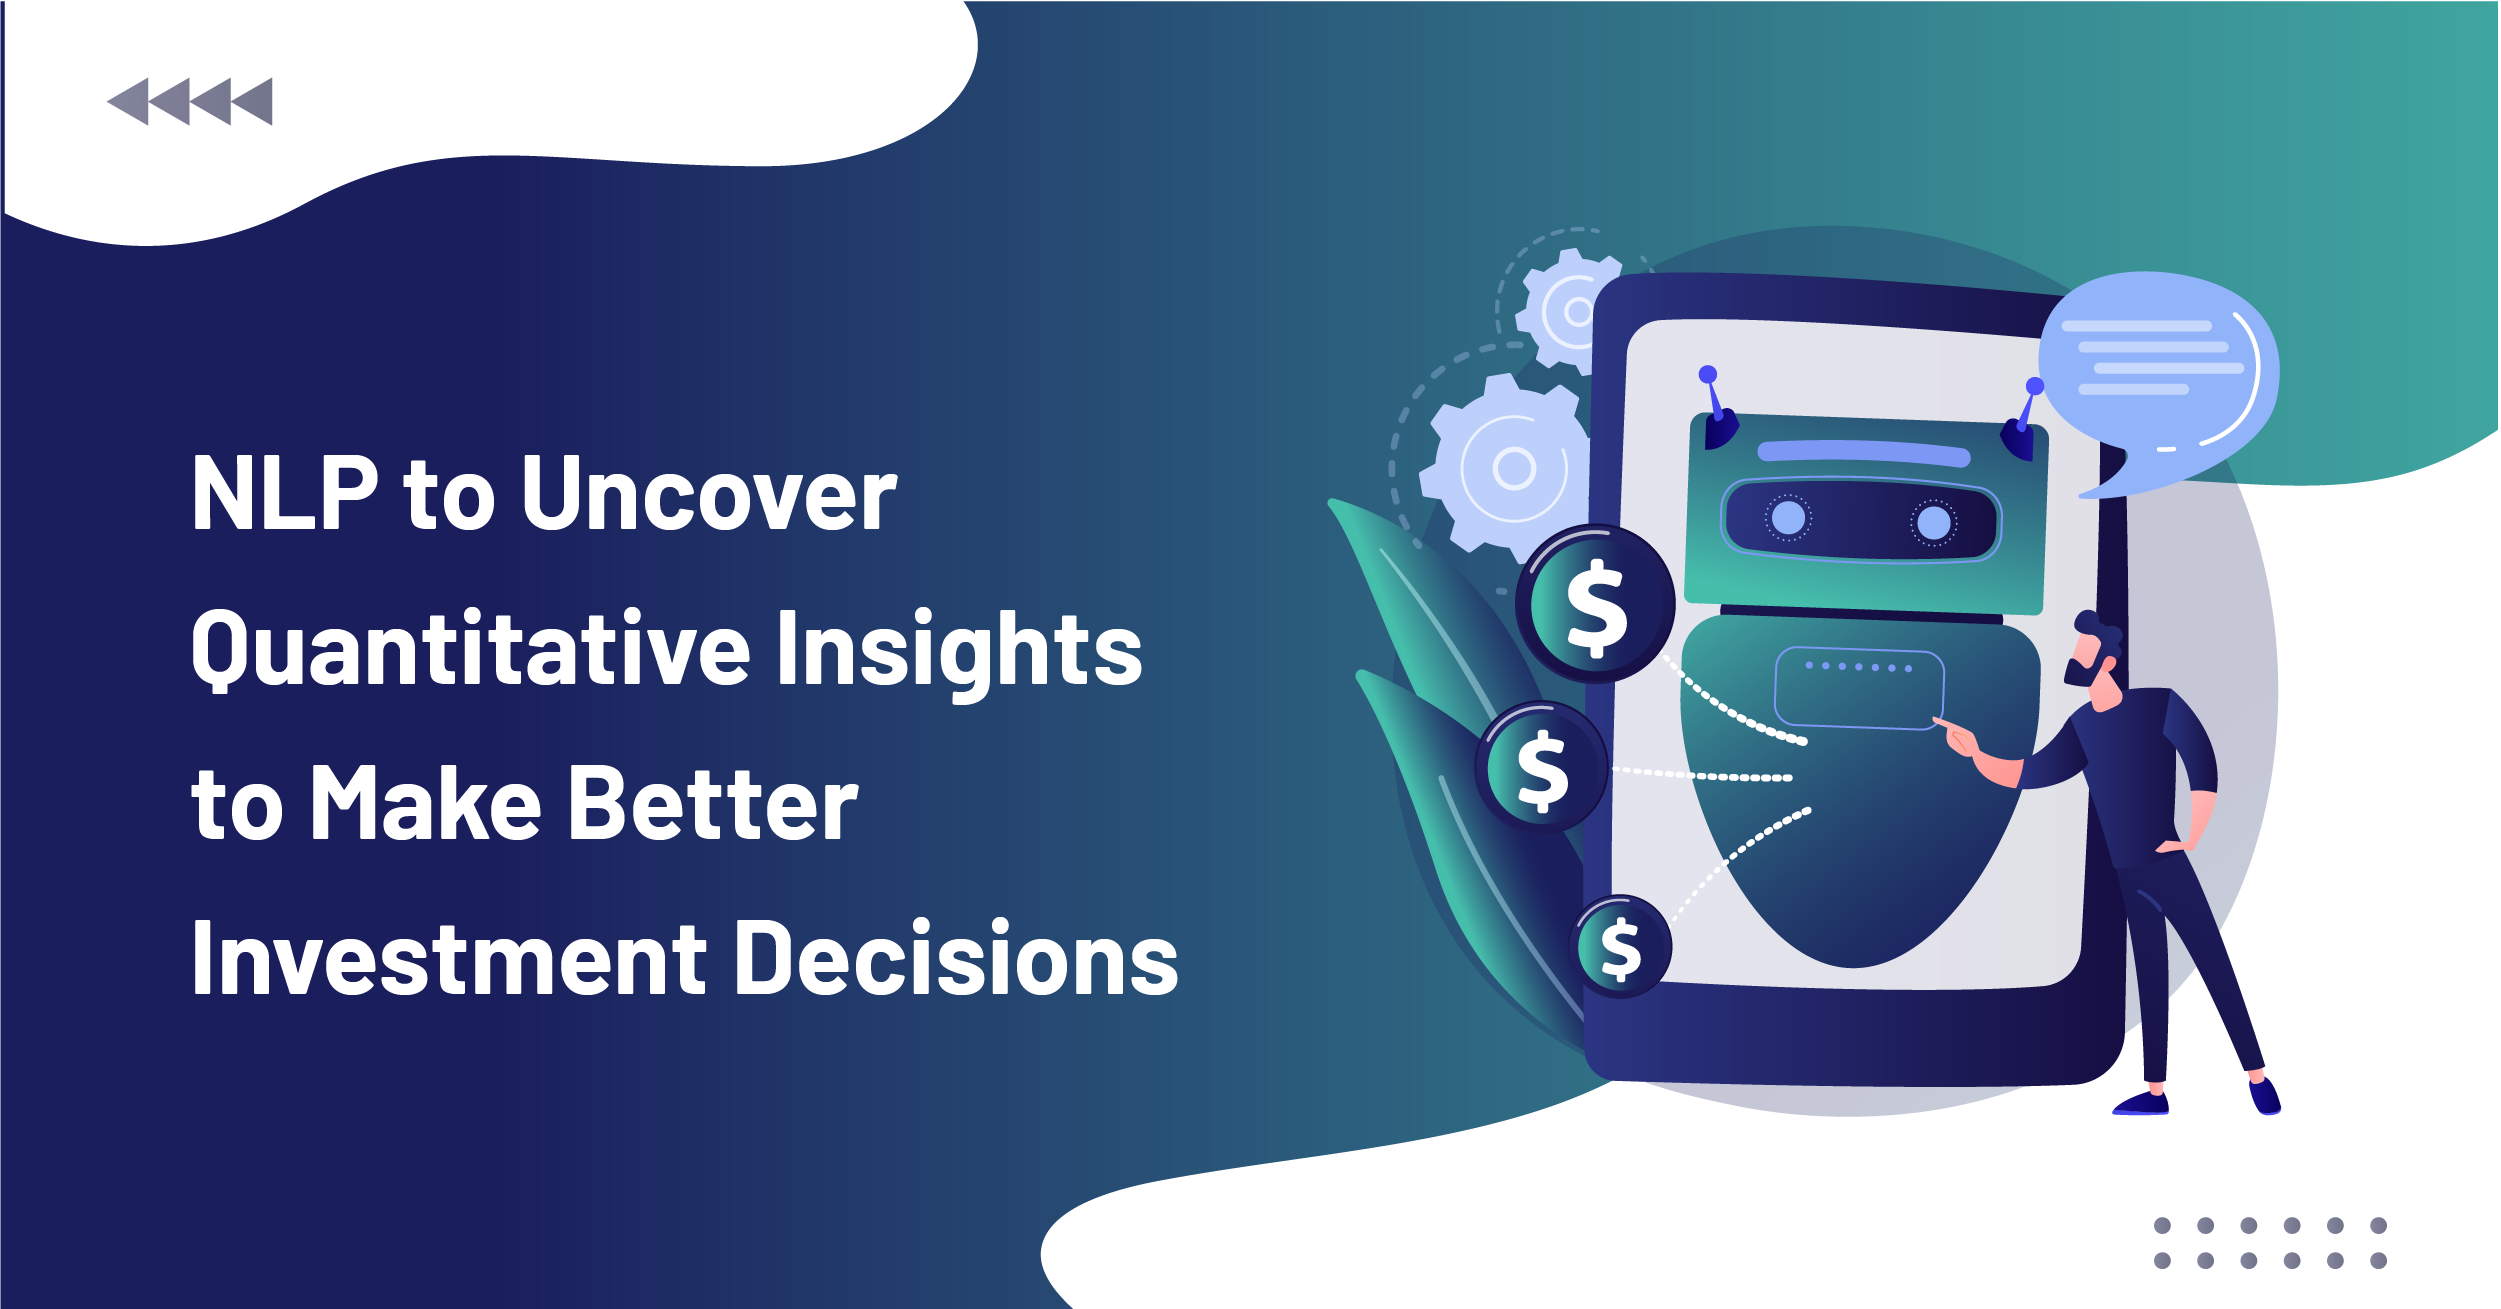 NLP to Uncover Quantitative Insights to Make Better Investment Decisions